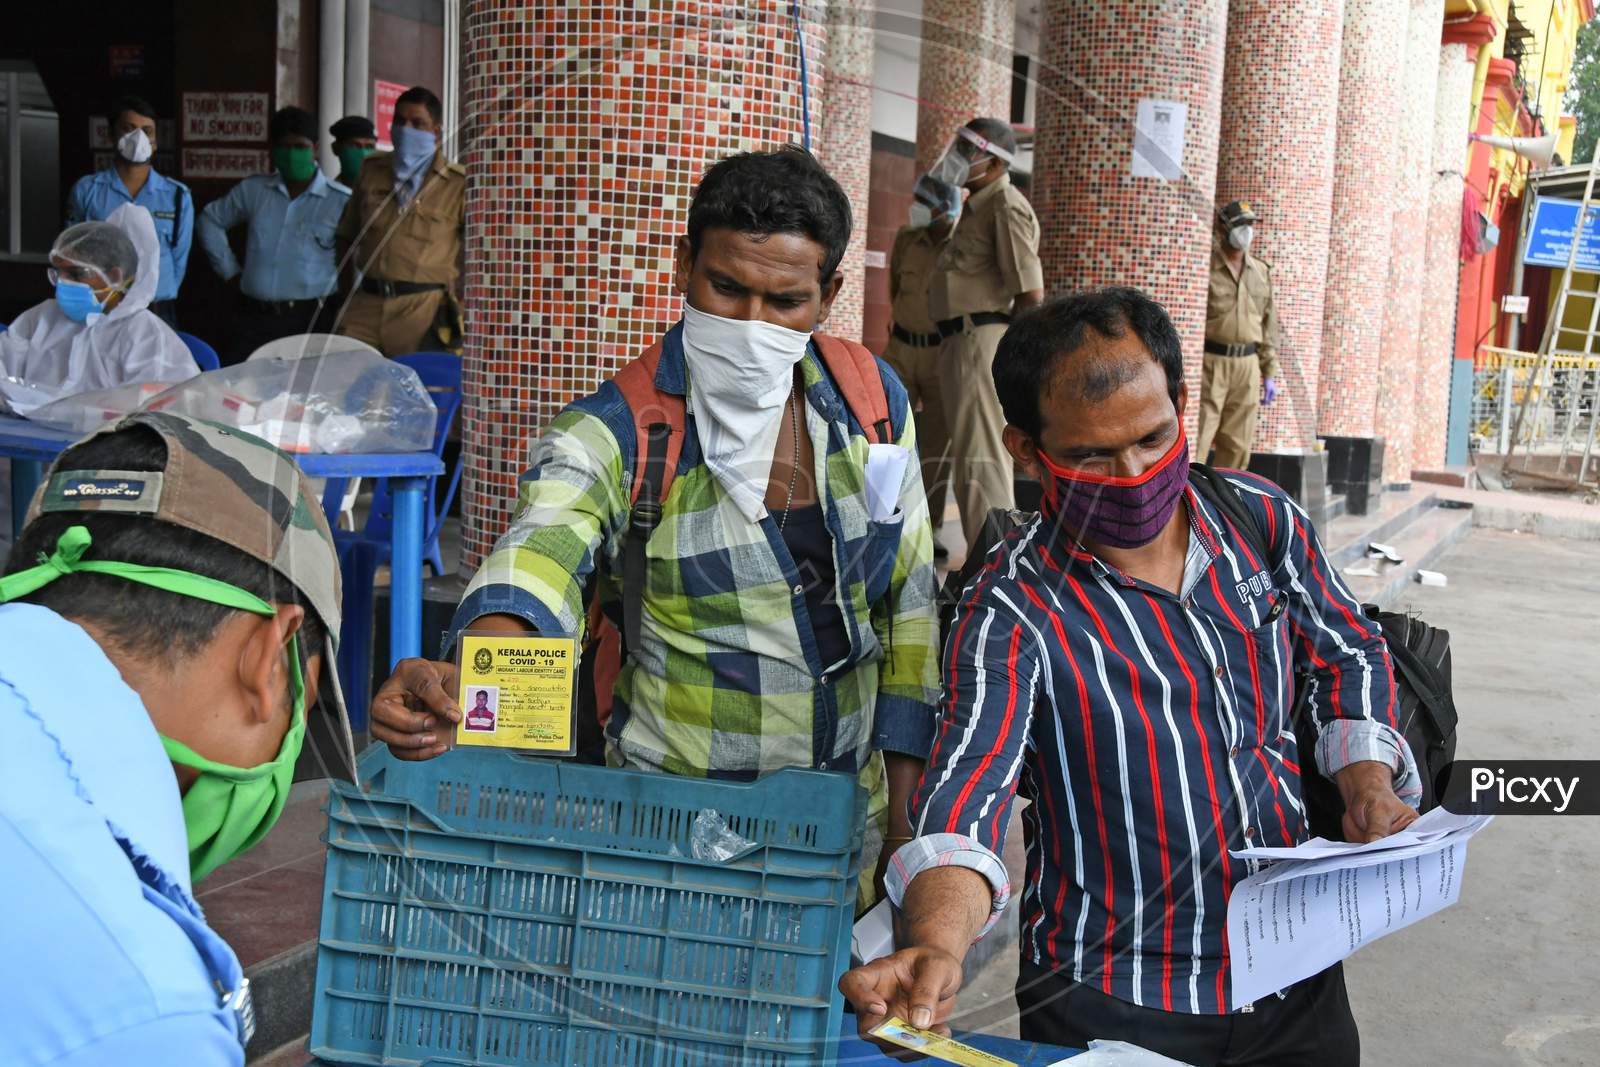 The migrant workers returning to home state (West Bengal) on the 'Shramik Special' Train from other states are undergoing health screening for Novel Coronavirus (COVID-19) testing.